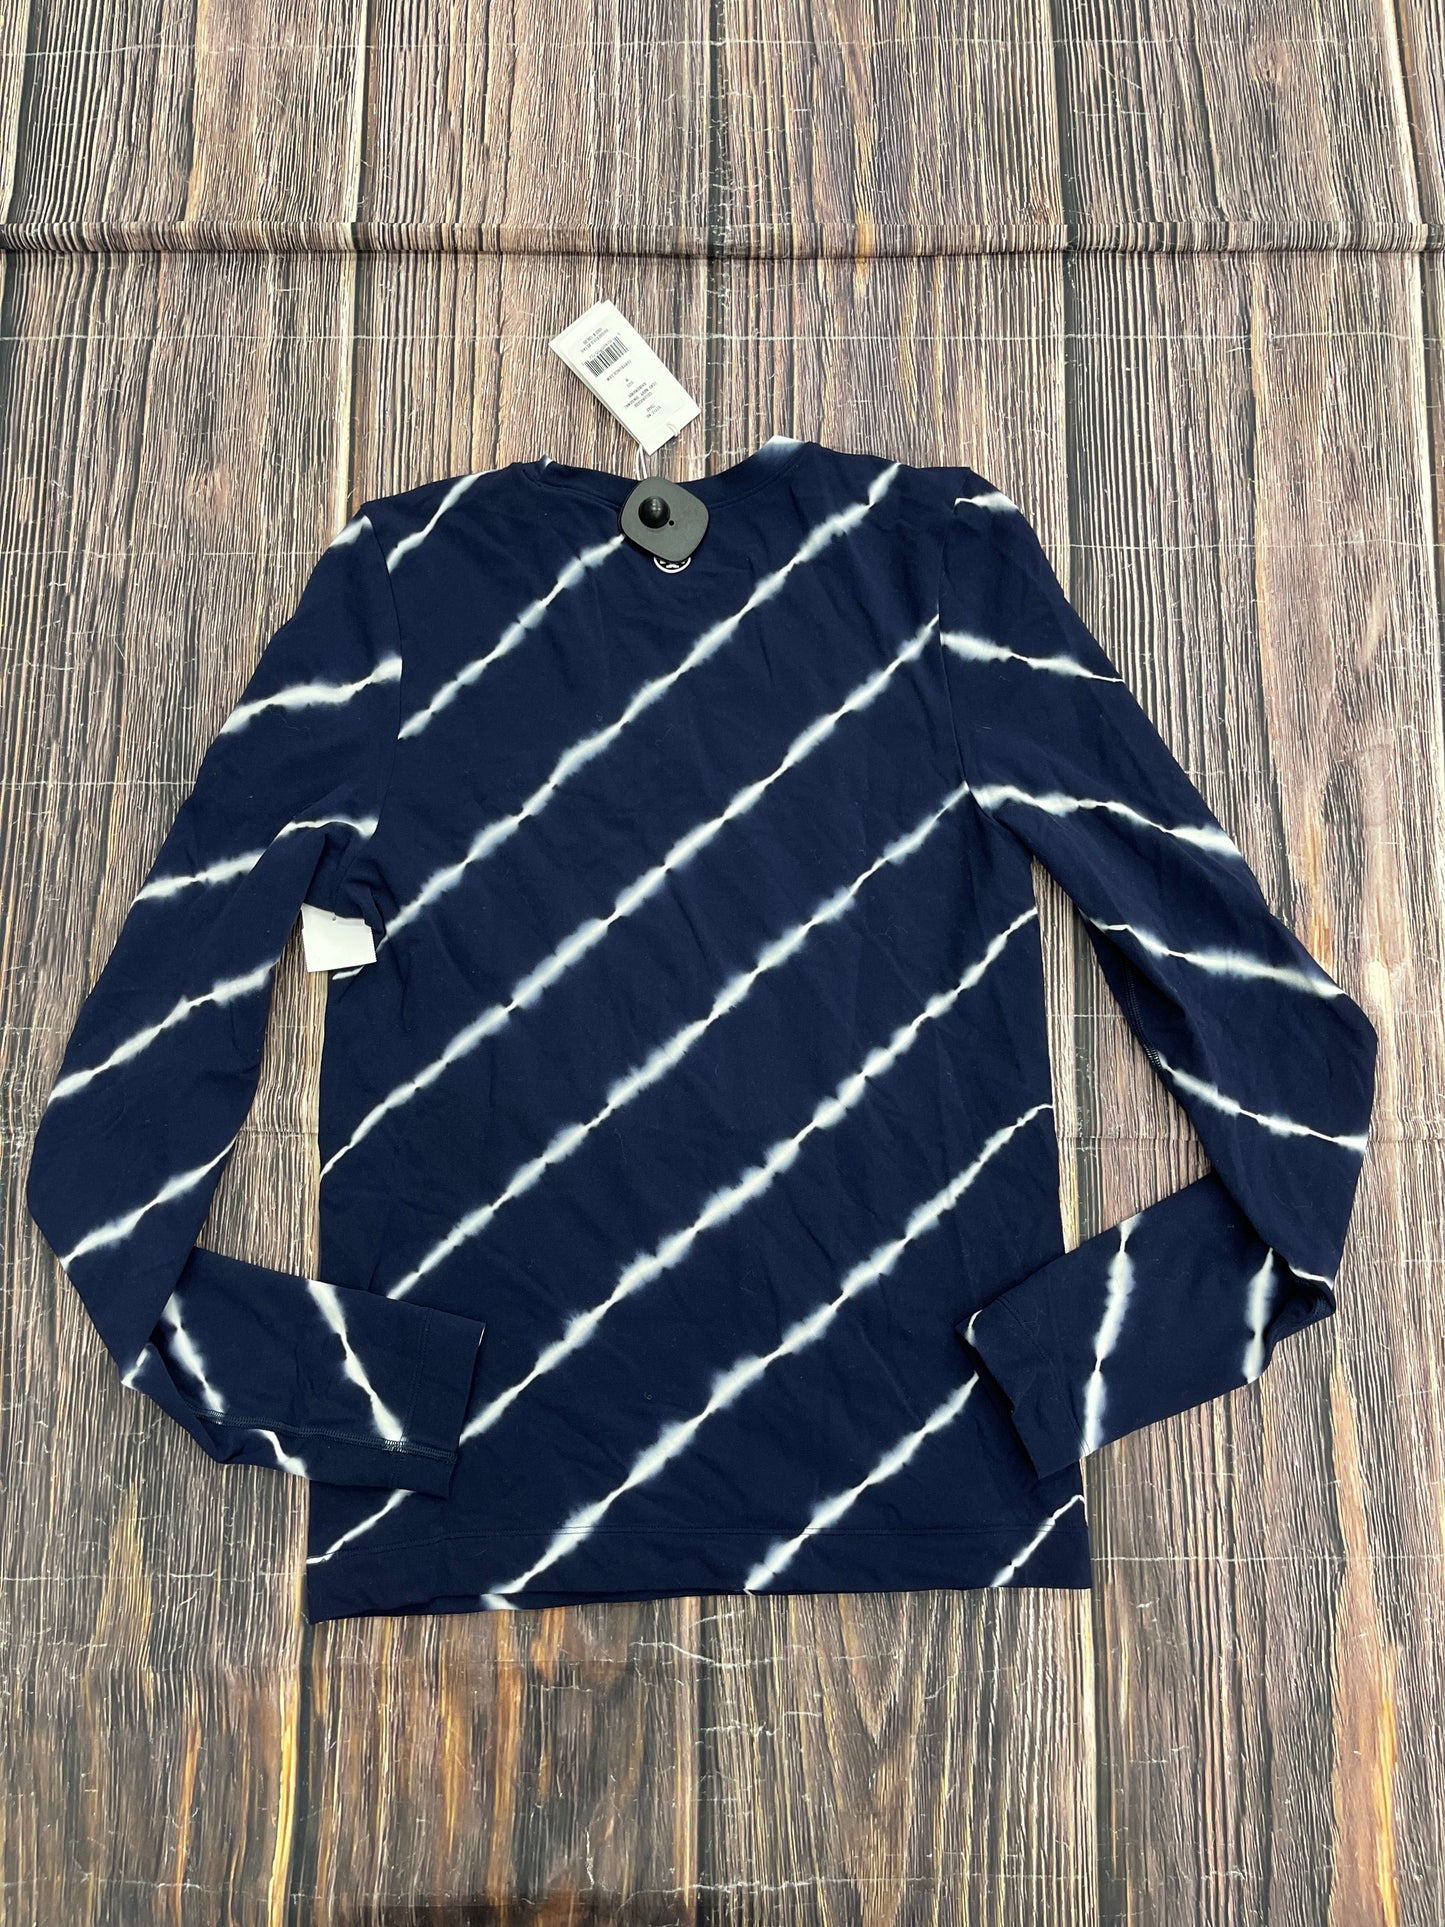 Blue Athletic Top Long Sleeve Crewneck Tory Burch, Size M